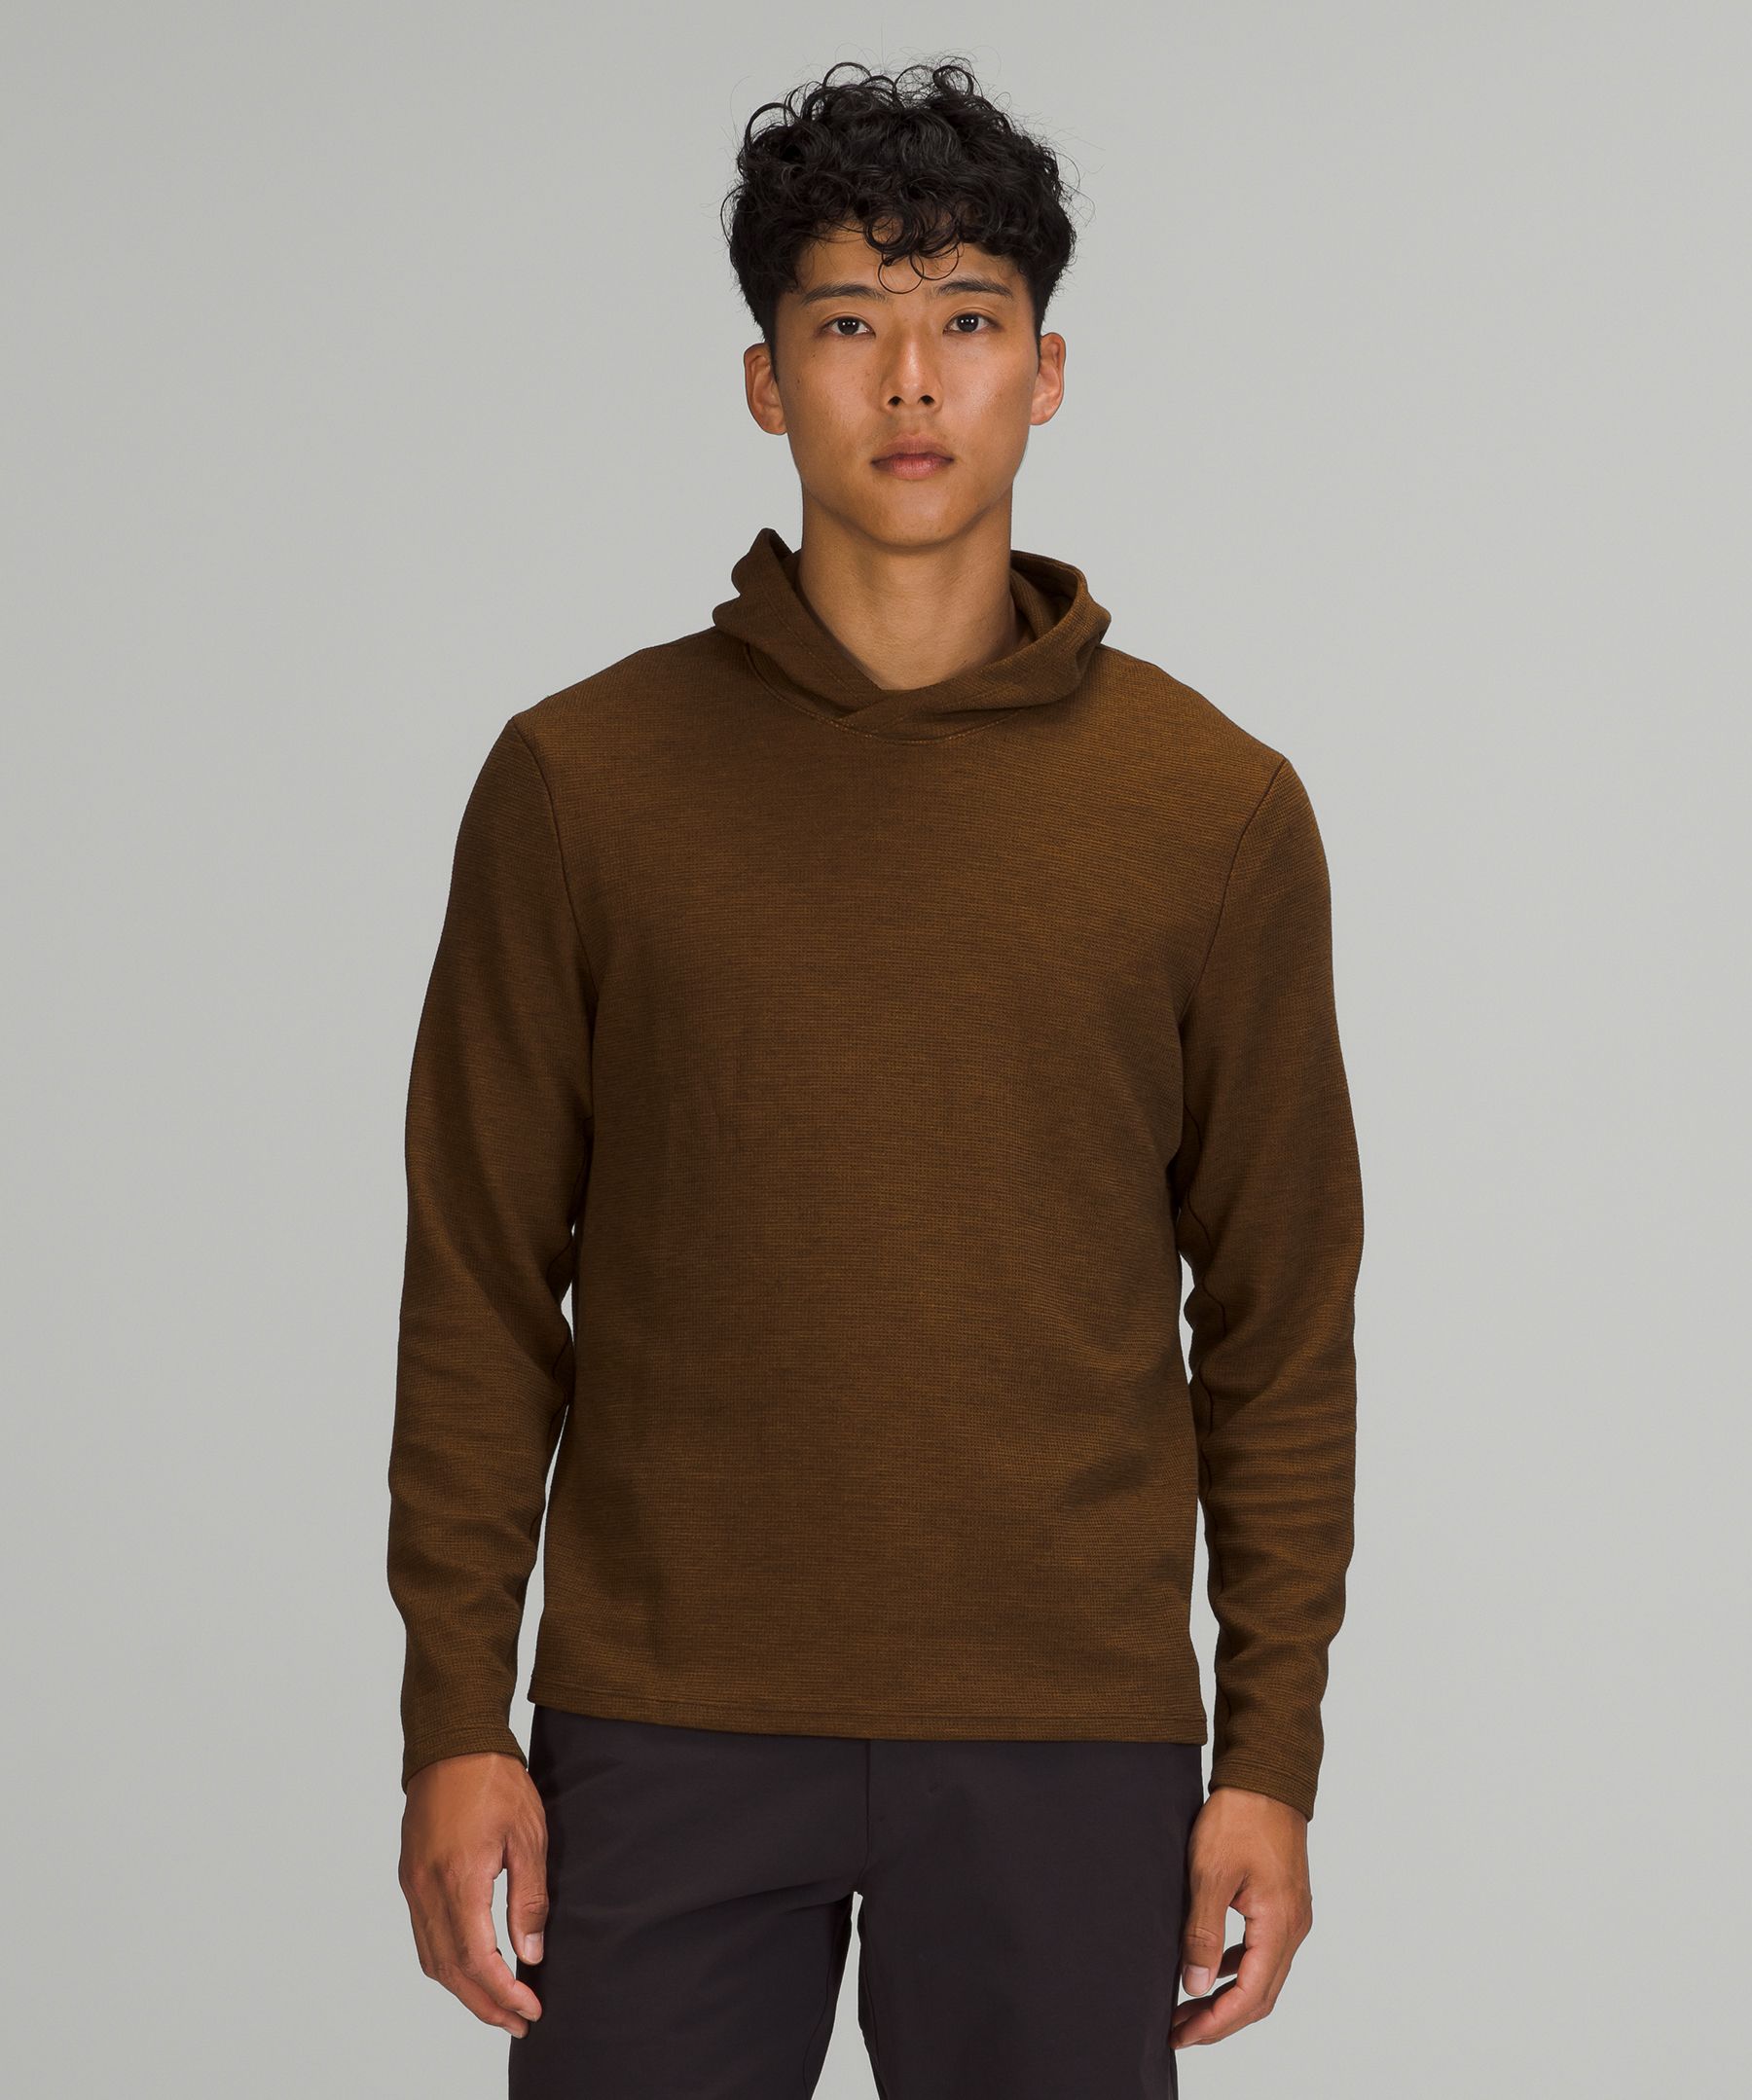 Lululemon Shift Stitch Hoodie In Heathered Copper Brown